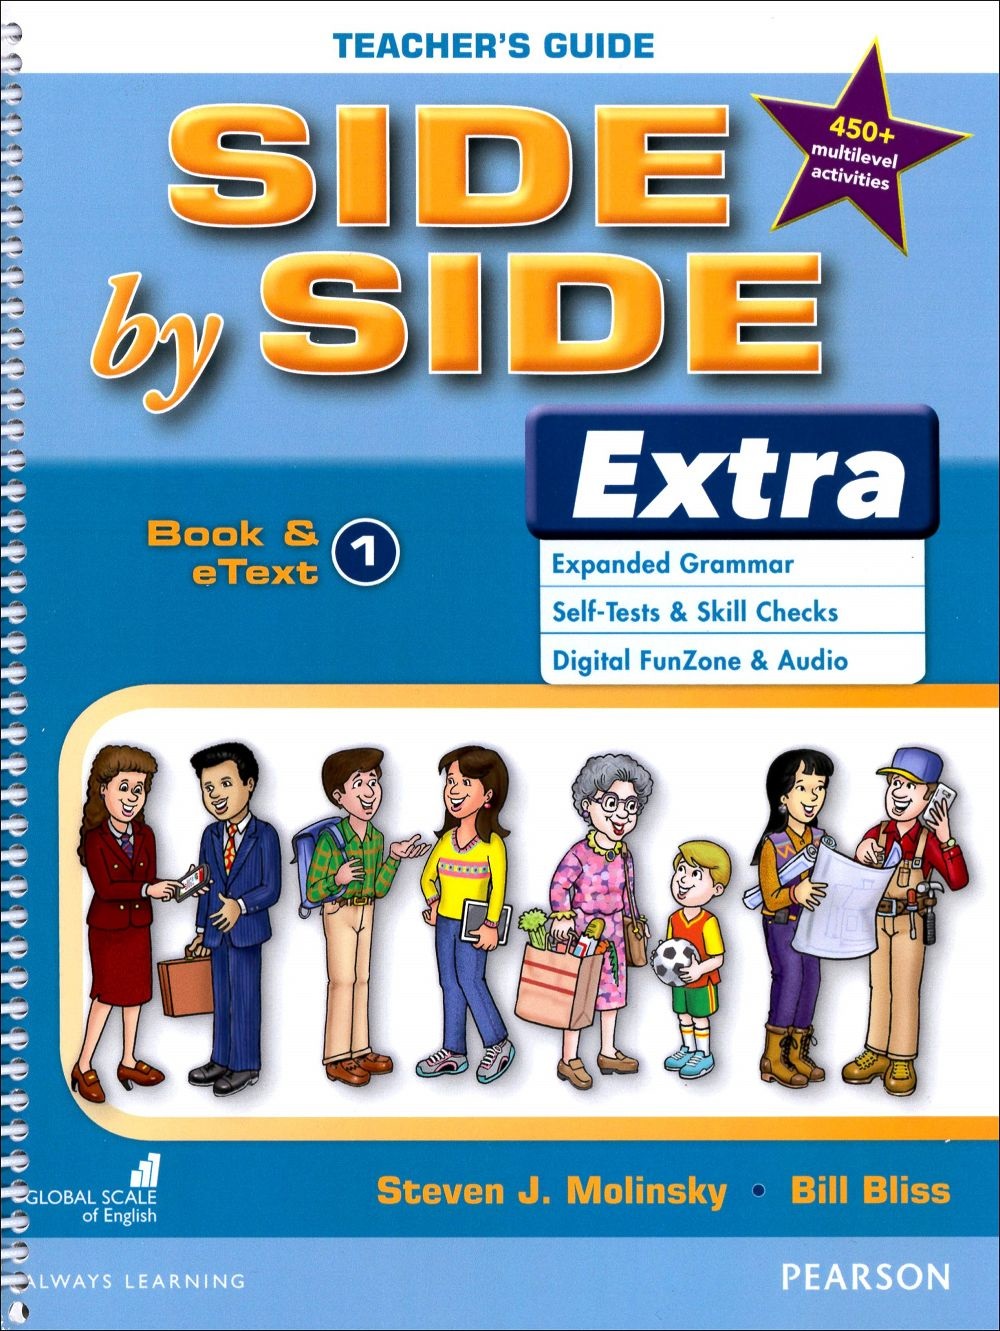 Side by Side Extra 3/e (1) Teacher’s Guide with Multilevel Activities